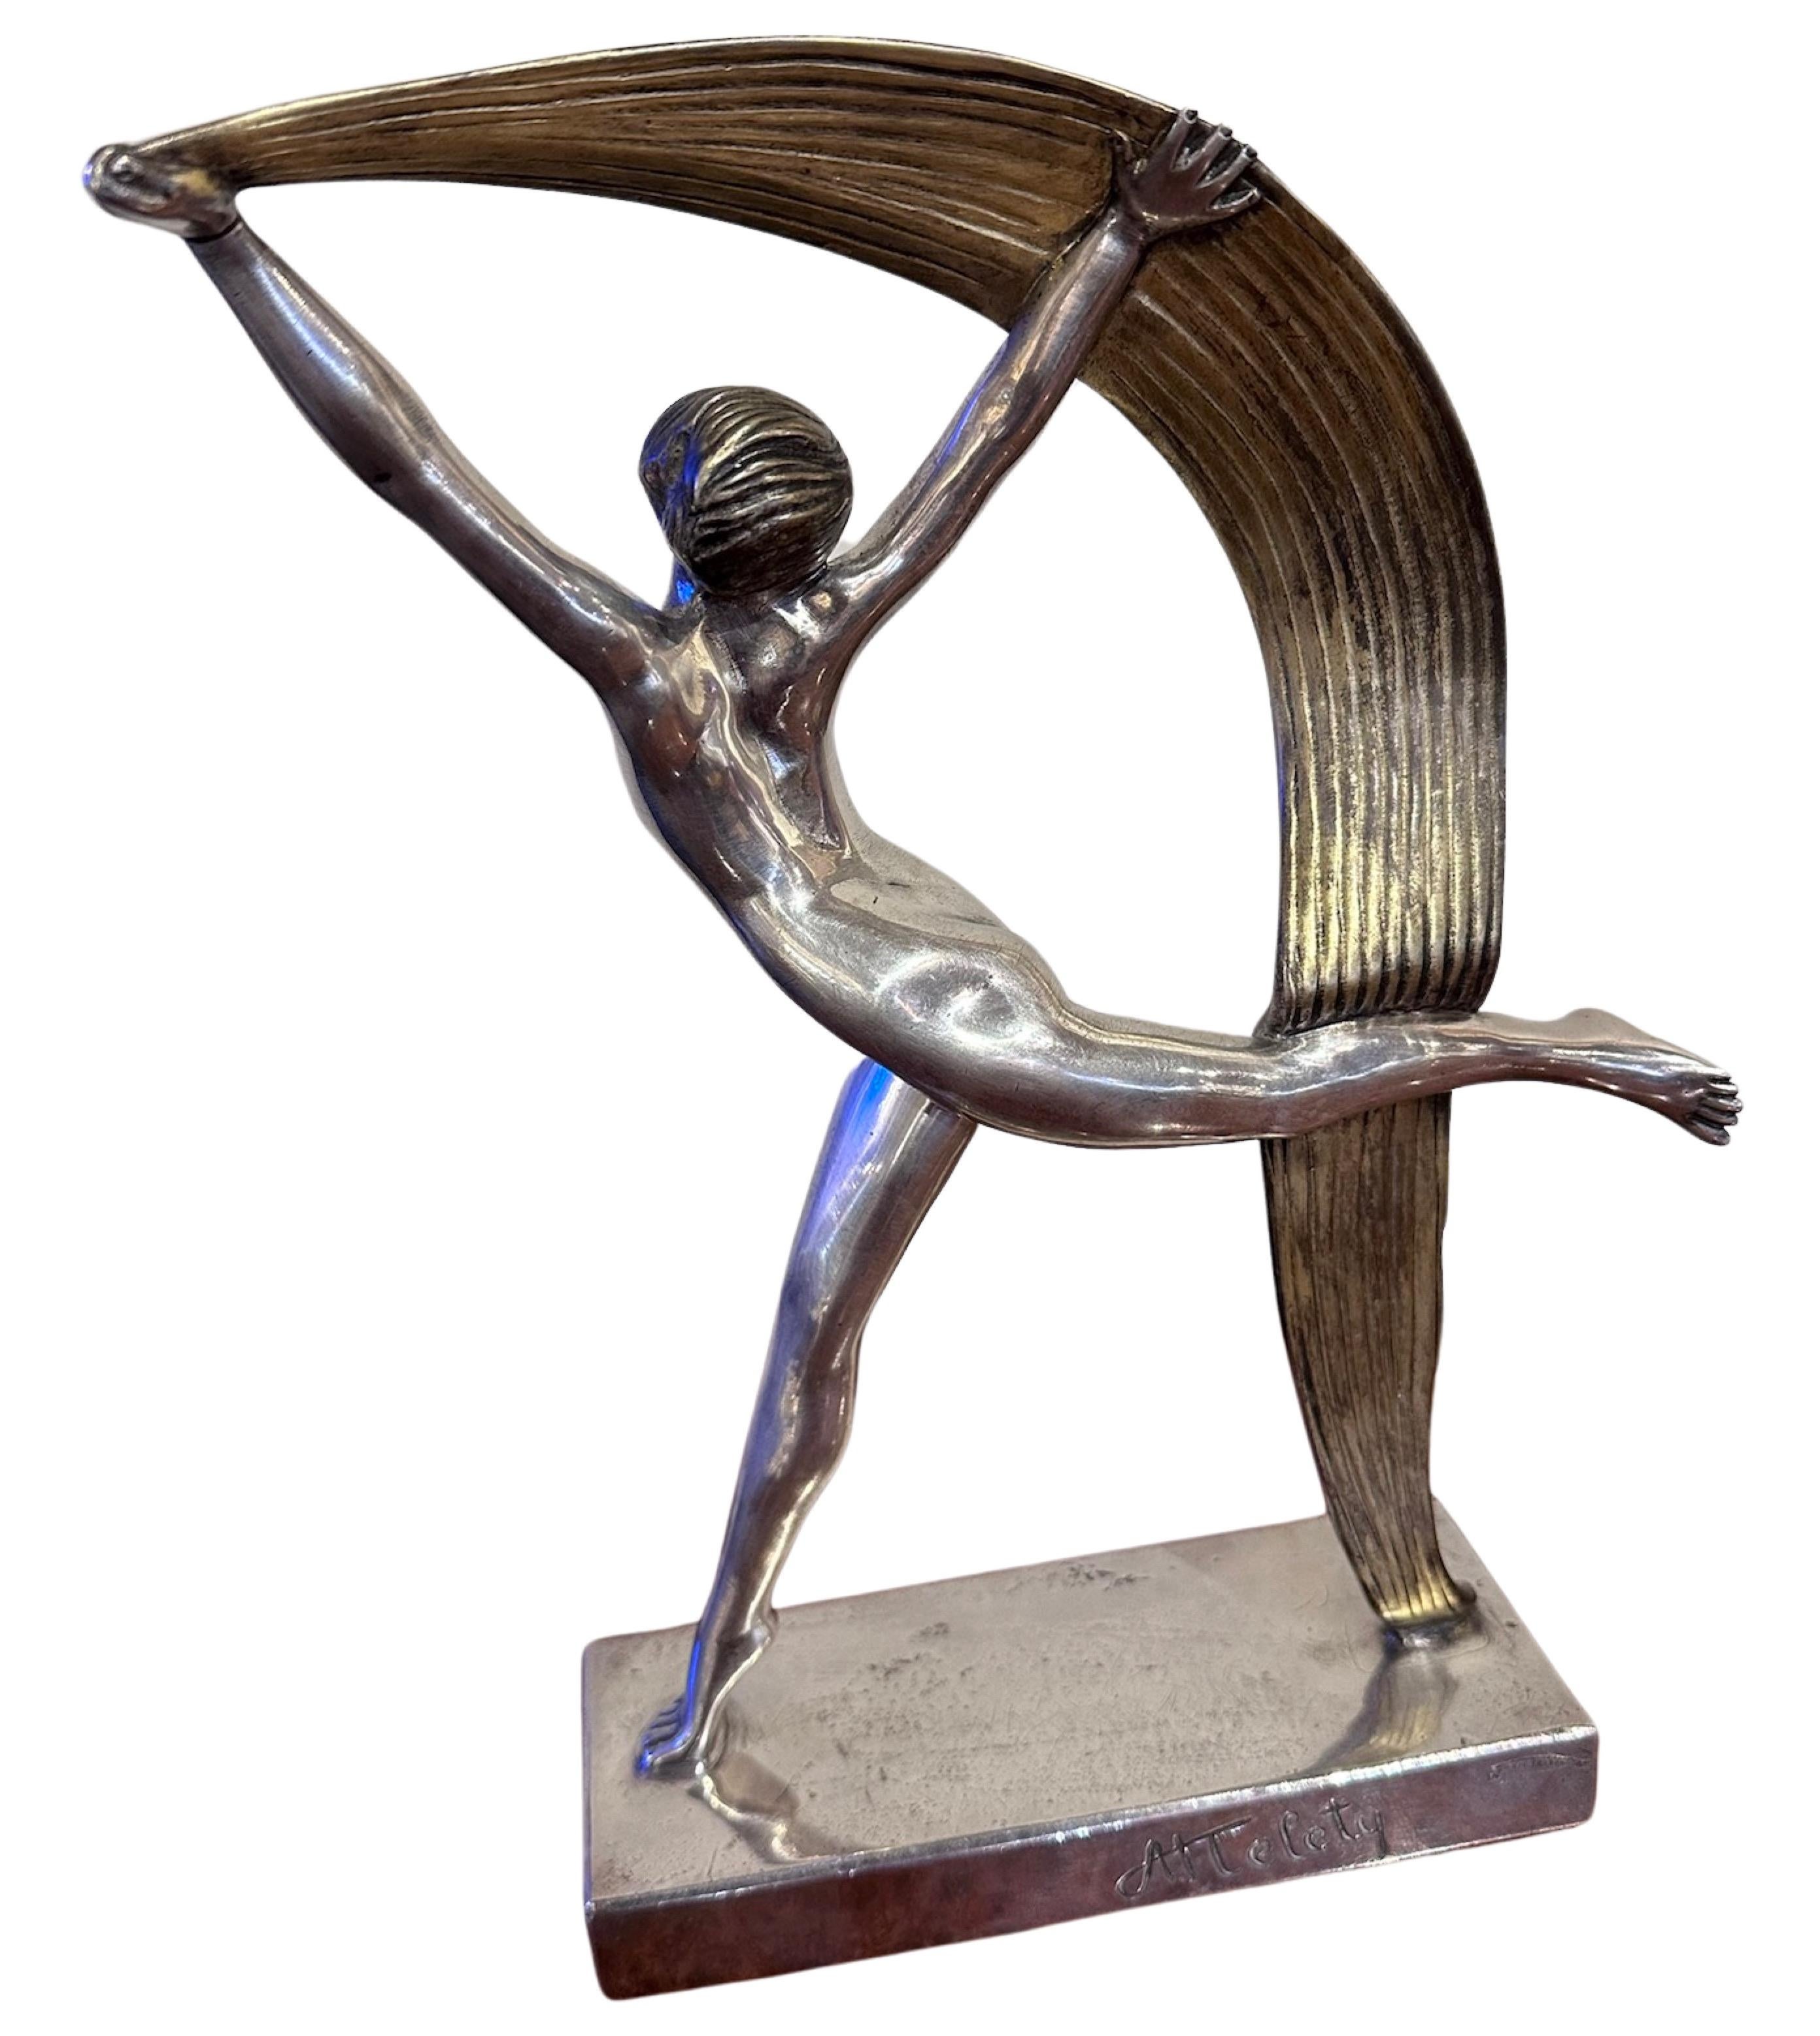 An Art Deco Bronze Scarf Dancer by Alexandre Kéléty created in France in1925 . It depicts a dancer holding aloft a stylized scarf, silver-plated and gilded, mounted on a silvered bronze base. This silver-plated and gilded bronze sculpture is a